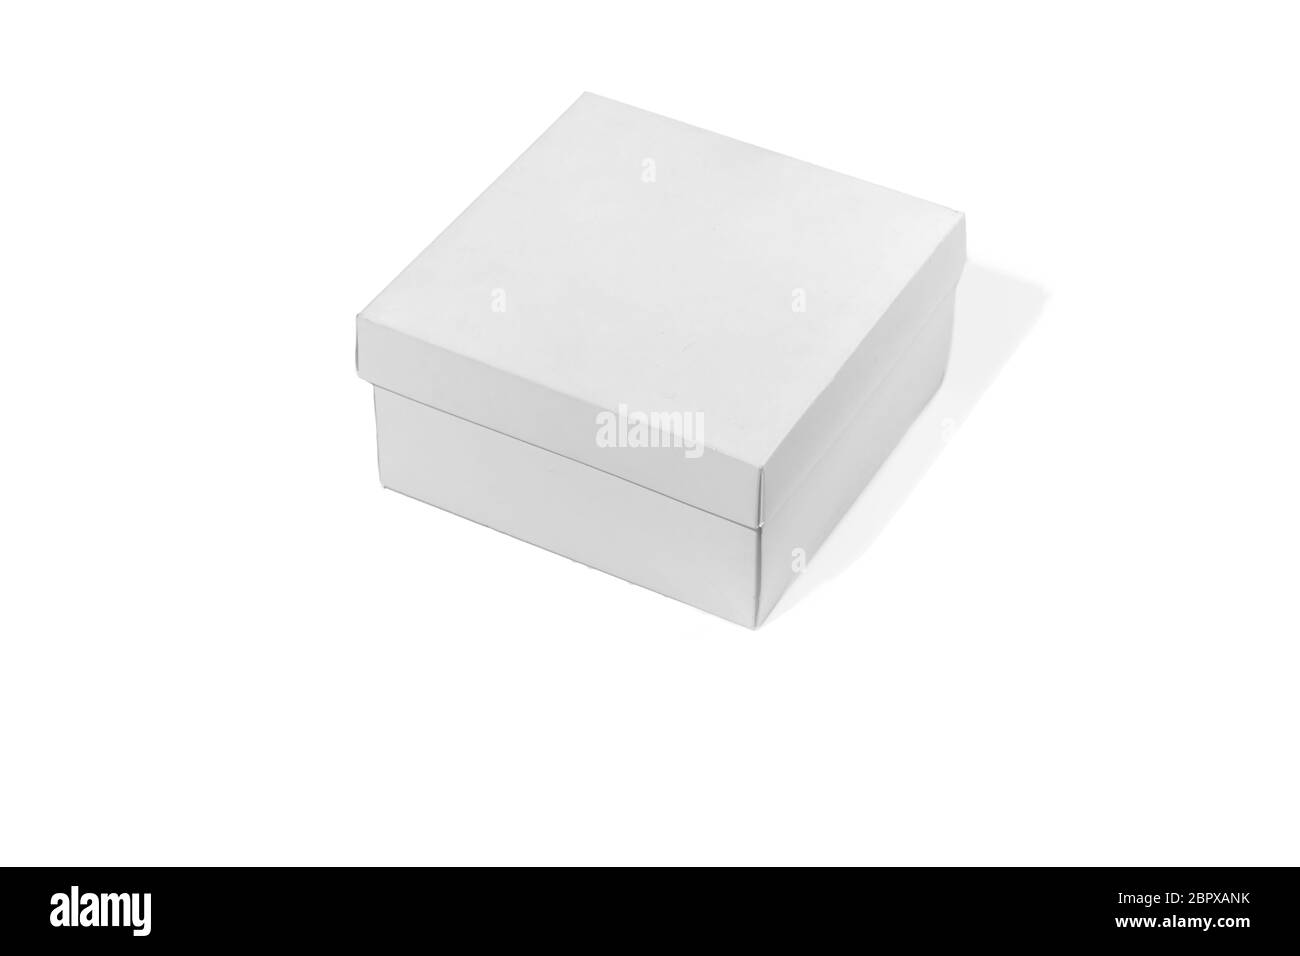 Blank white box isolated on a white studio background, copyspace for advertising. Ready for your graphics. Shopping, shipping, packing, delivery. Paperboard, cardboard for transportation and recycling. Stock Photo